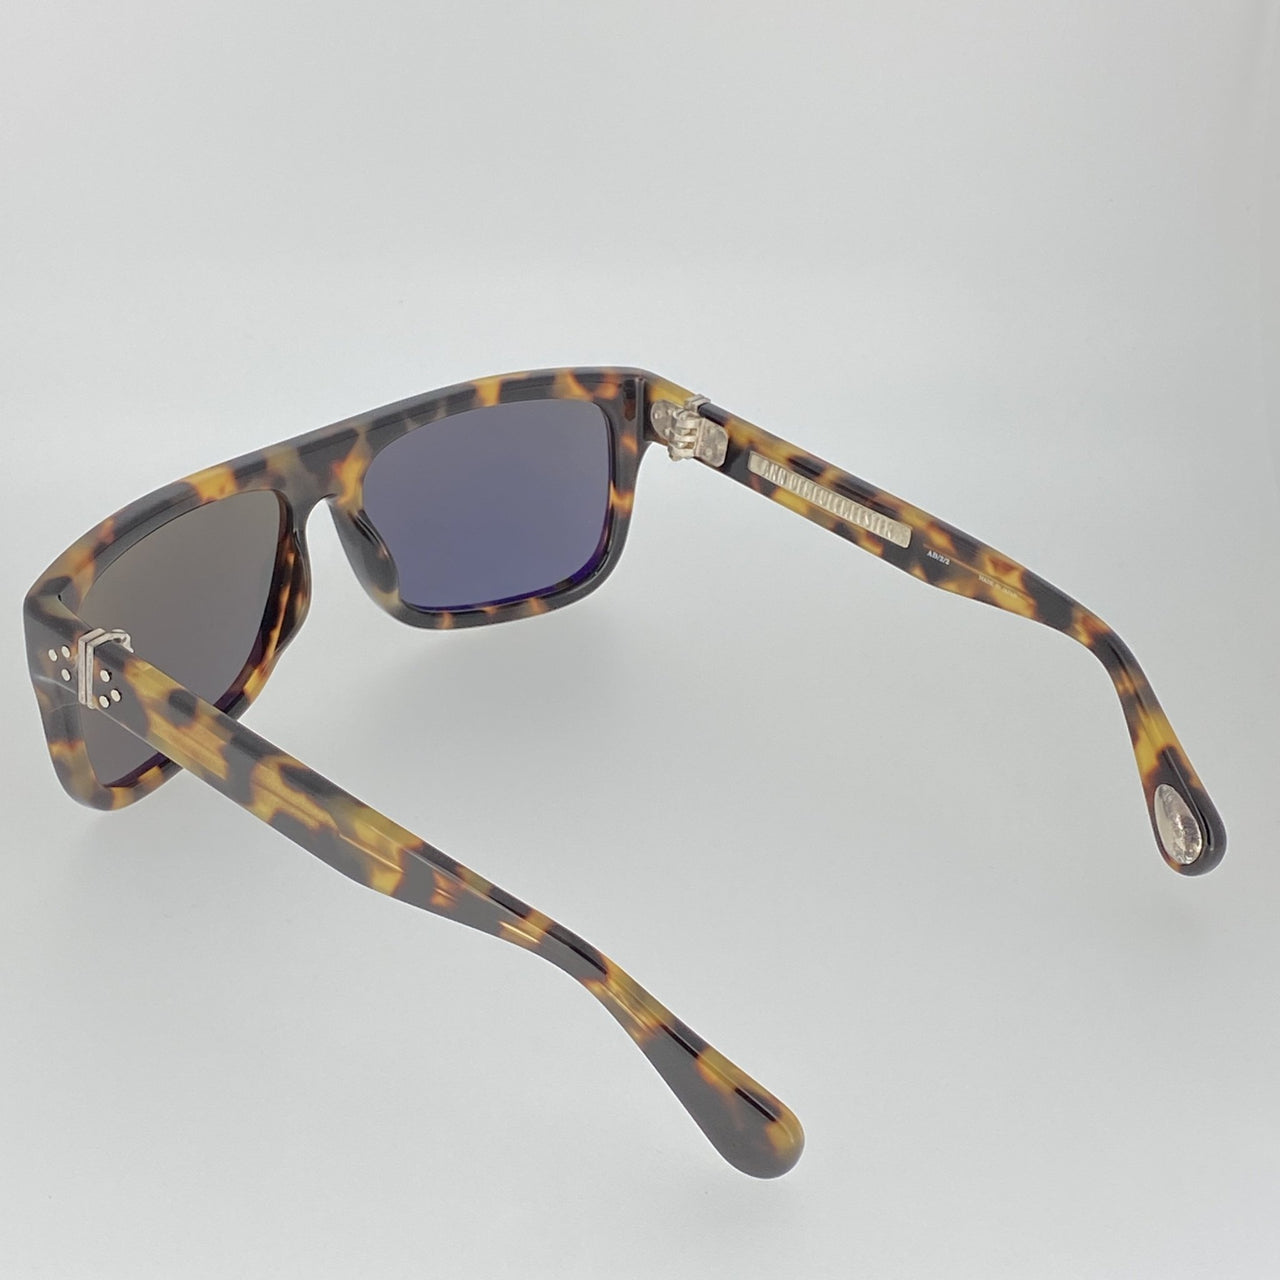 Ann Demeulemeester Sunglasses Flat Top Tortoise Shell 925 Silver with Grey Lenses CAT3 AD2C2SUN - Watches & Crystals